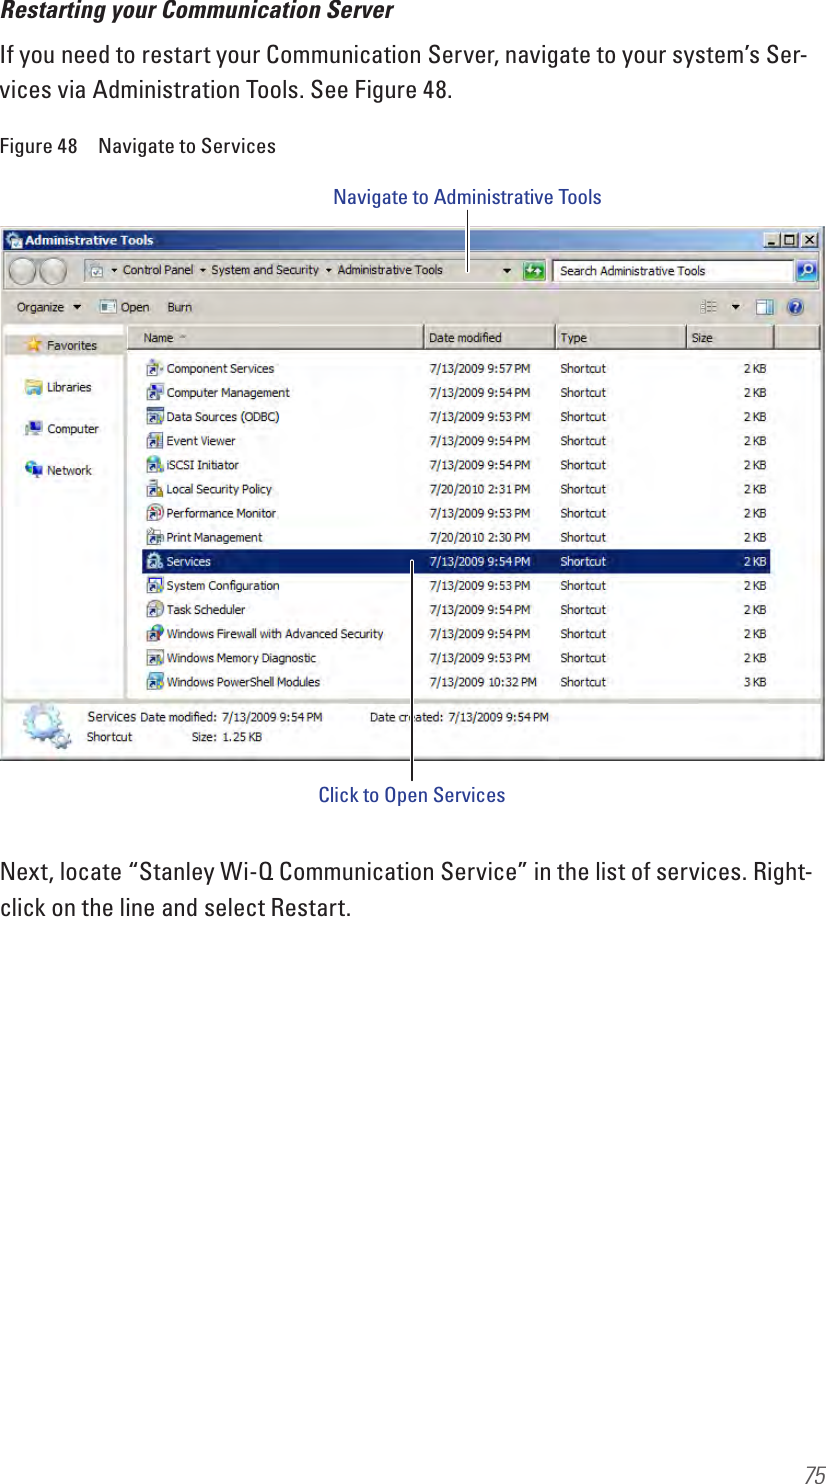 75Restarting your Communication ServerIf you need to restart your Communication Server, navigate to your system’s Ser-vices via Administration Tools. See Figure 48.Figure 48  Navigate to ServicesNext, locate “Stanley Wi-Q Communication Service” in the list of services. Right-click on the line and select Restart.Navigate to Administrative ToolsClick to Open Services